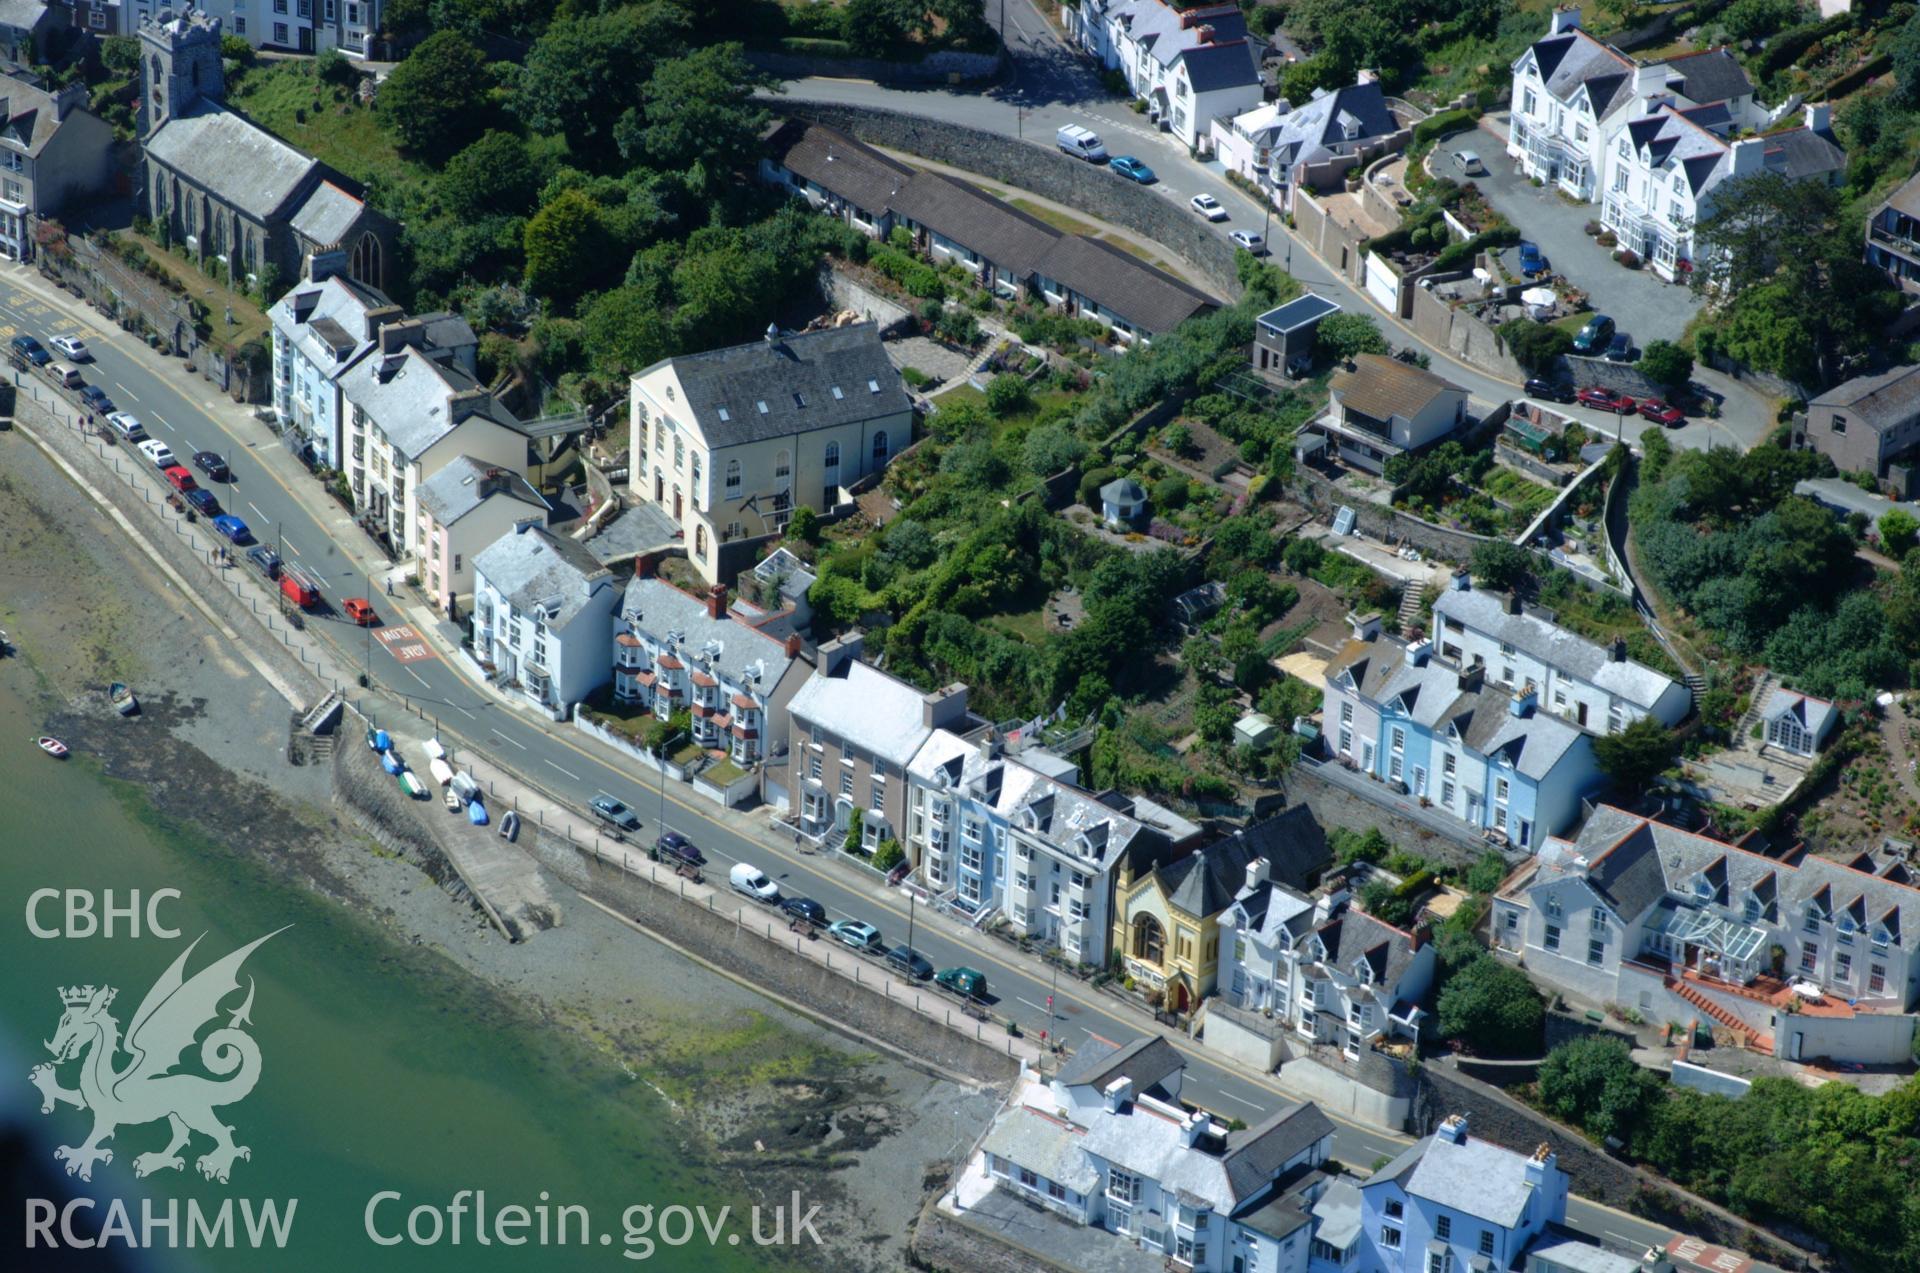 RCAHMW colour oblique aerial photograph of Aberdyfi taken on 14/06/2004 by Toby Driver